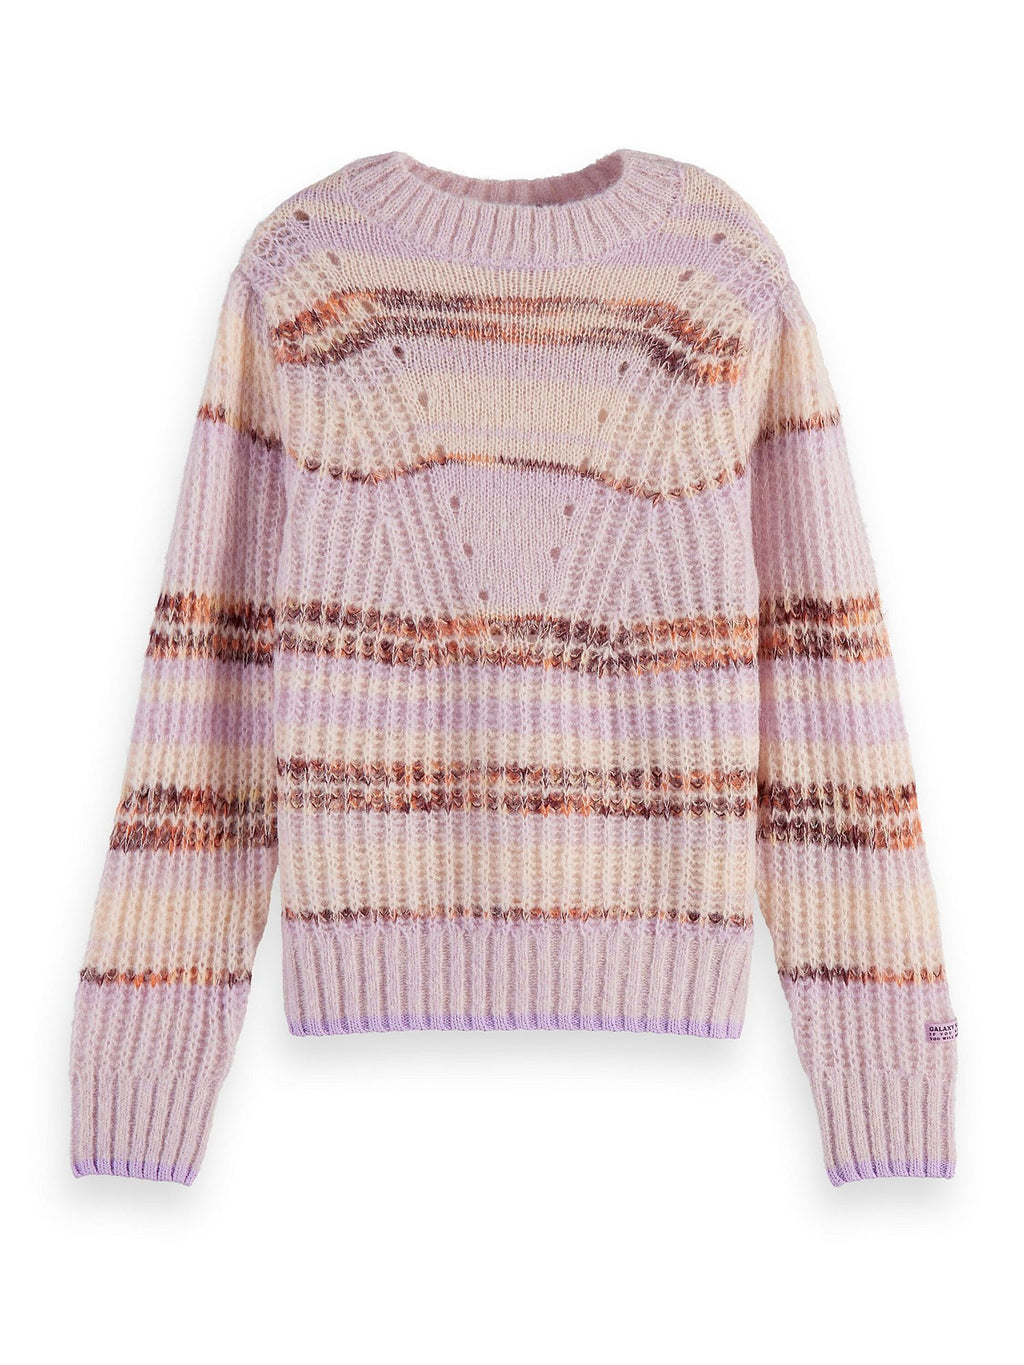 Scotch & Soda Girls Puffy Sleeved Pullover - Lilac